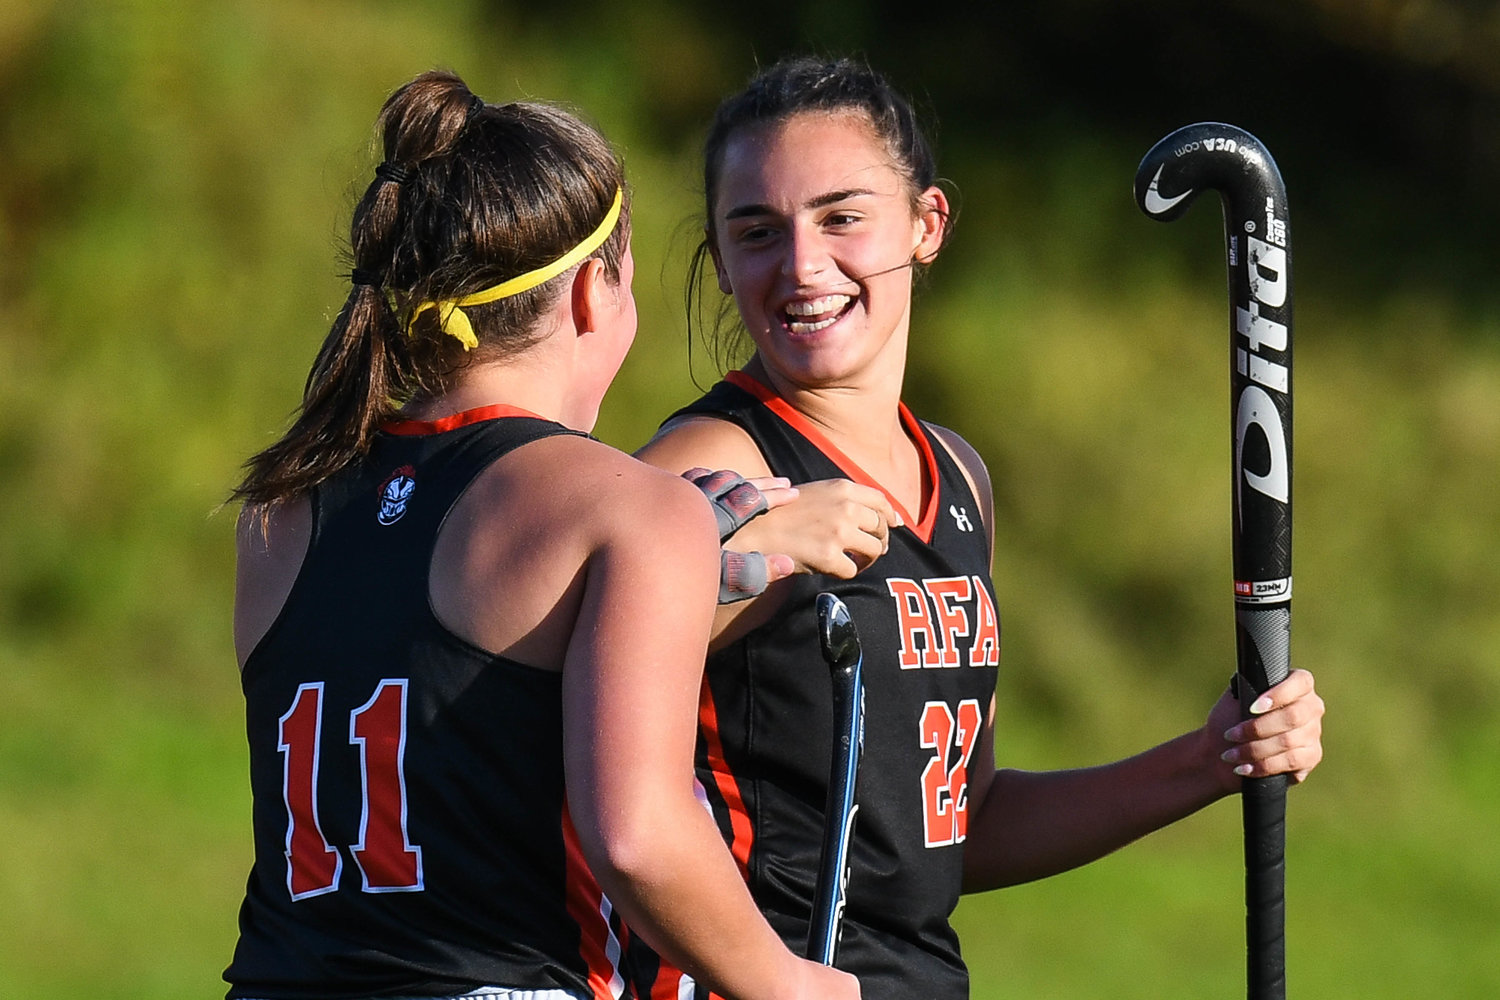 From left, Rome Free Academy player Hannah Lowder (11) celebrates a goal with teammate Drew Kopek (22) during the game against Central Valley Academy on Monday in Ilion. Kopek also scored twice and had an assist in RFA’s 6-0 win.